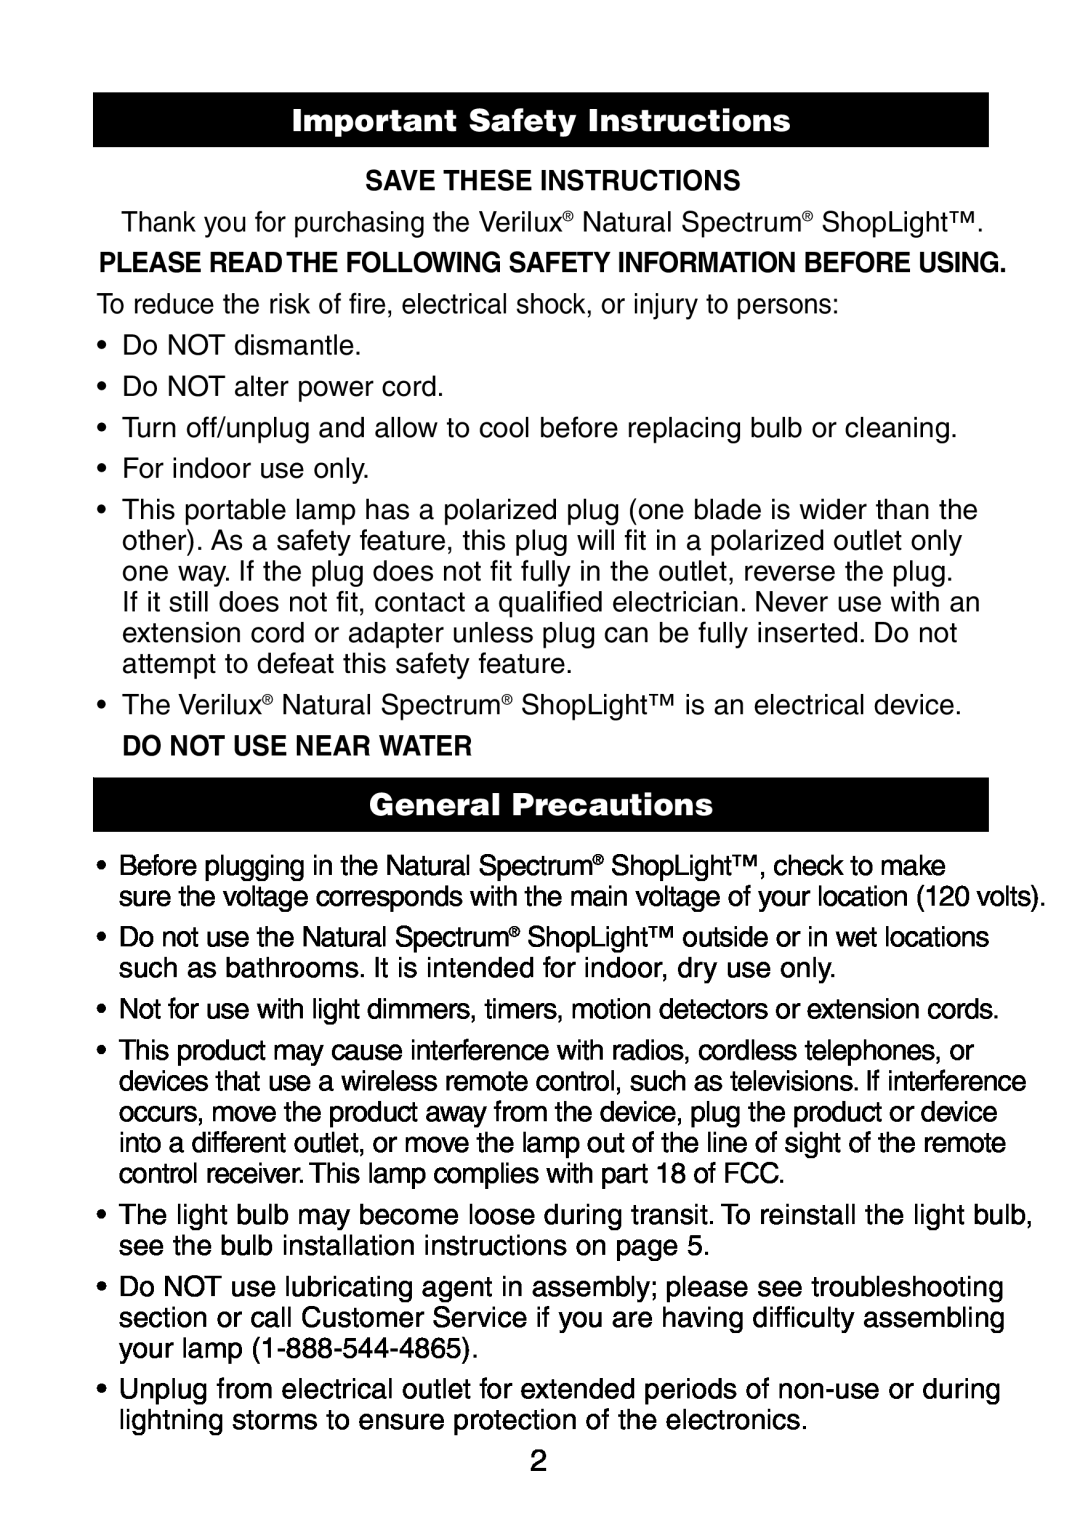 Verilux VC01HH1 Important Safety Instructions, General Precautions, Save These Instructions, Do Not Use Near Water 